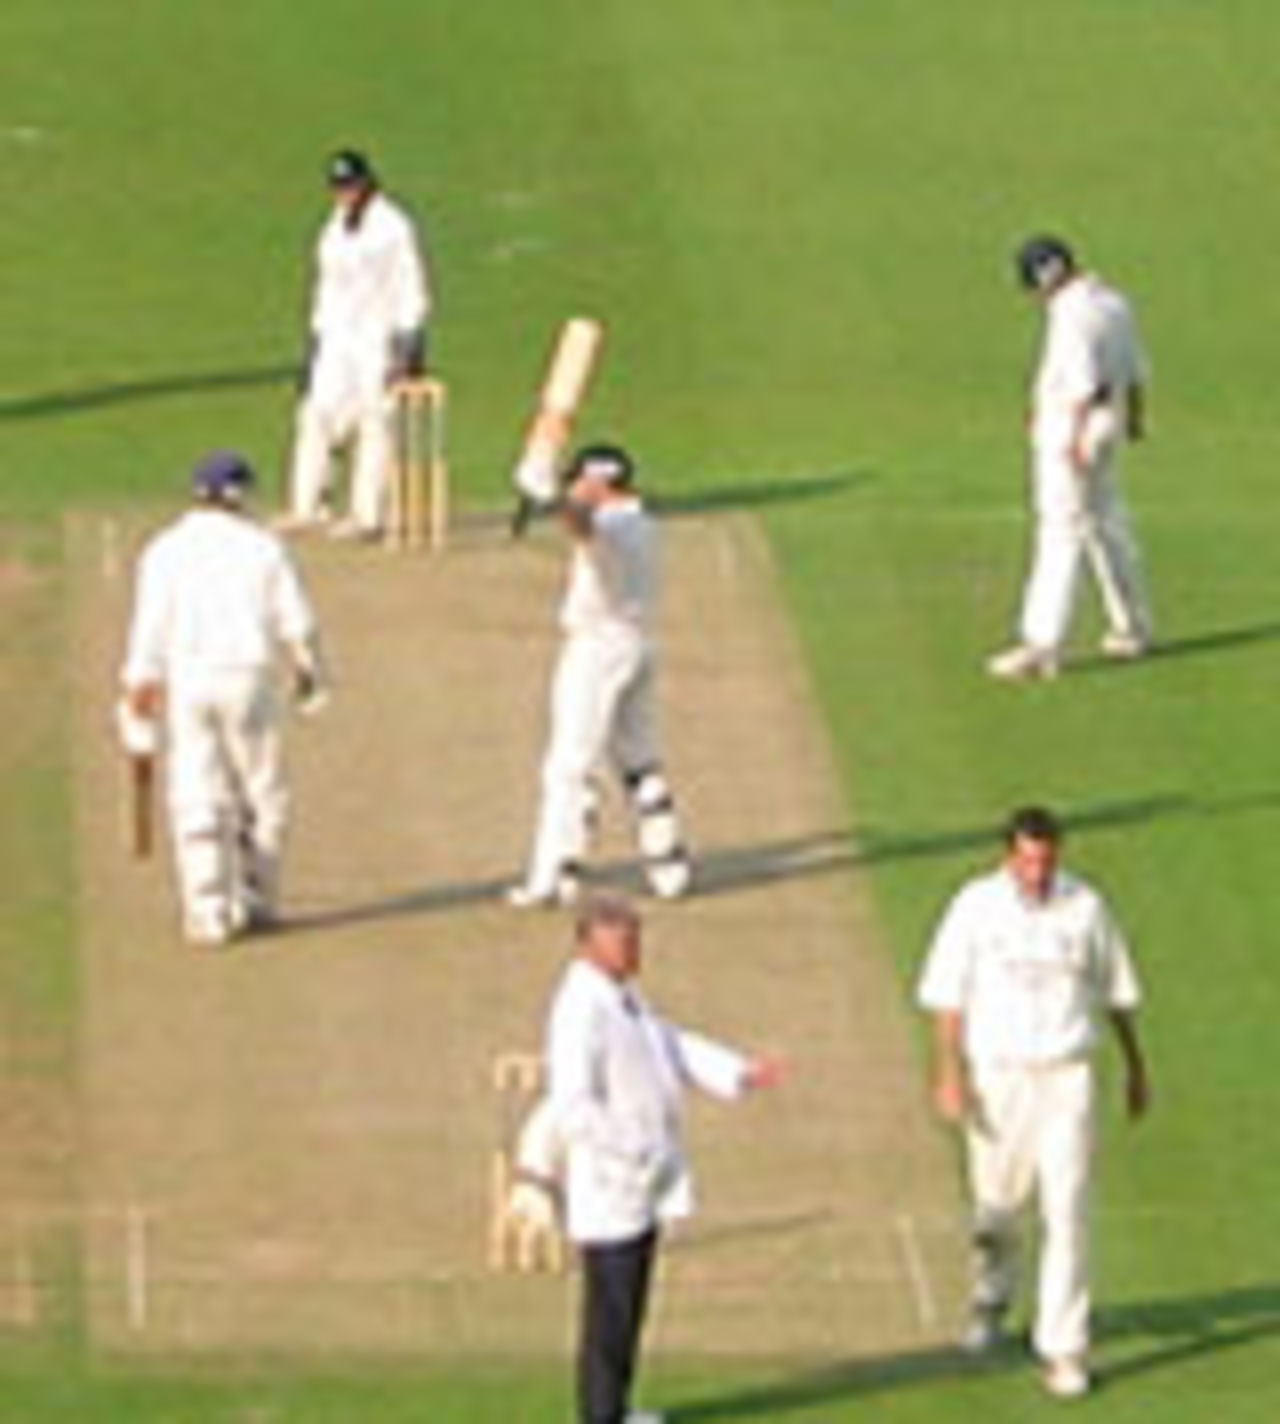 Ian Bell reaches his hundred, Middlesex v Warwickshire, Lord's, June 2, 2004